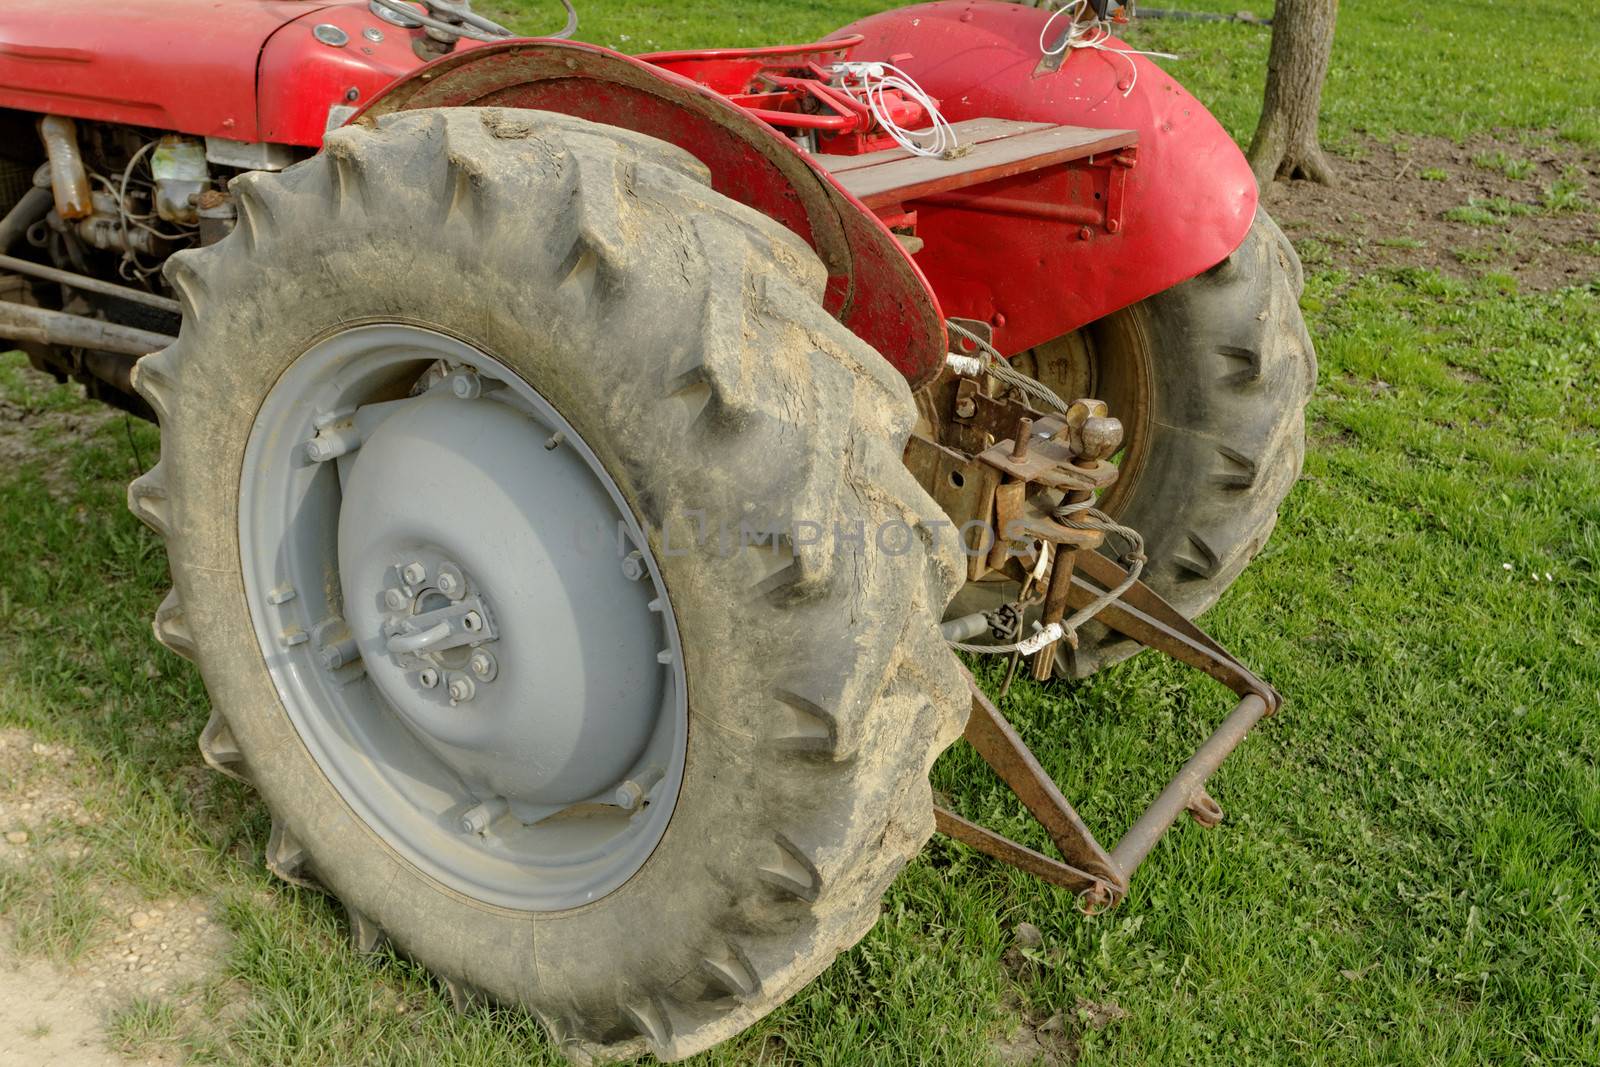 rear of the red tractor